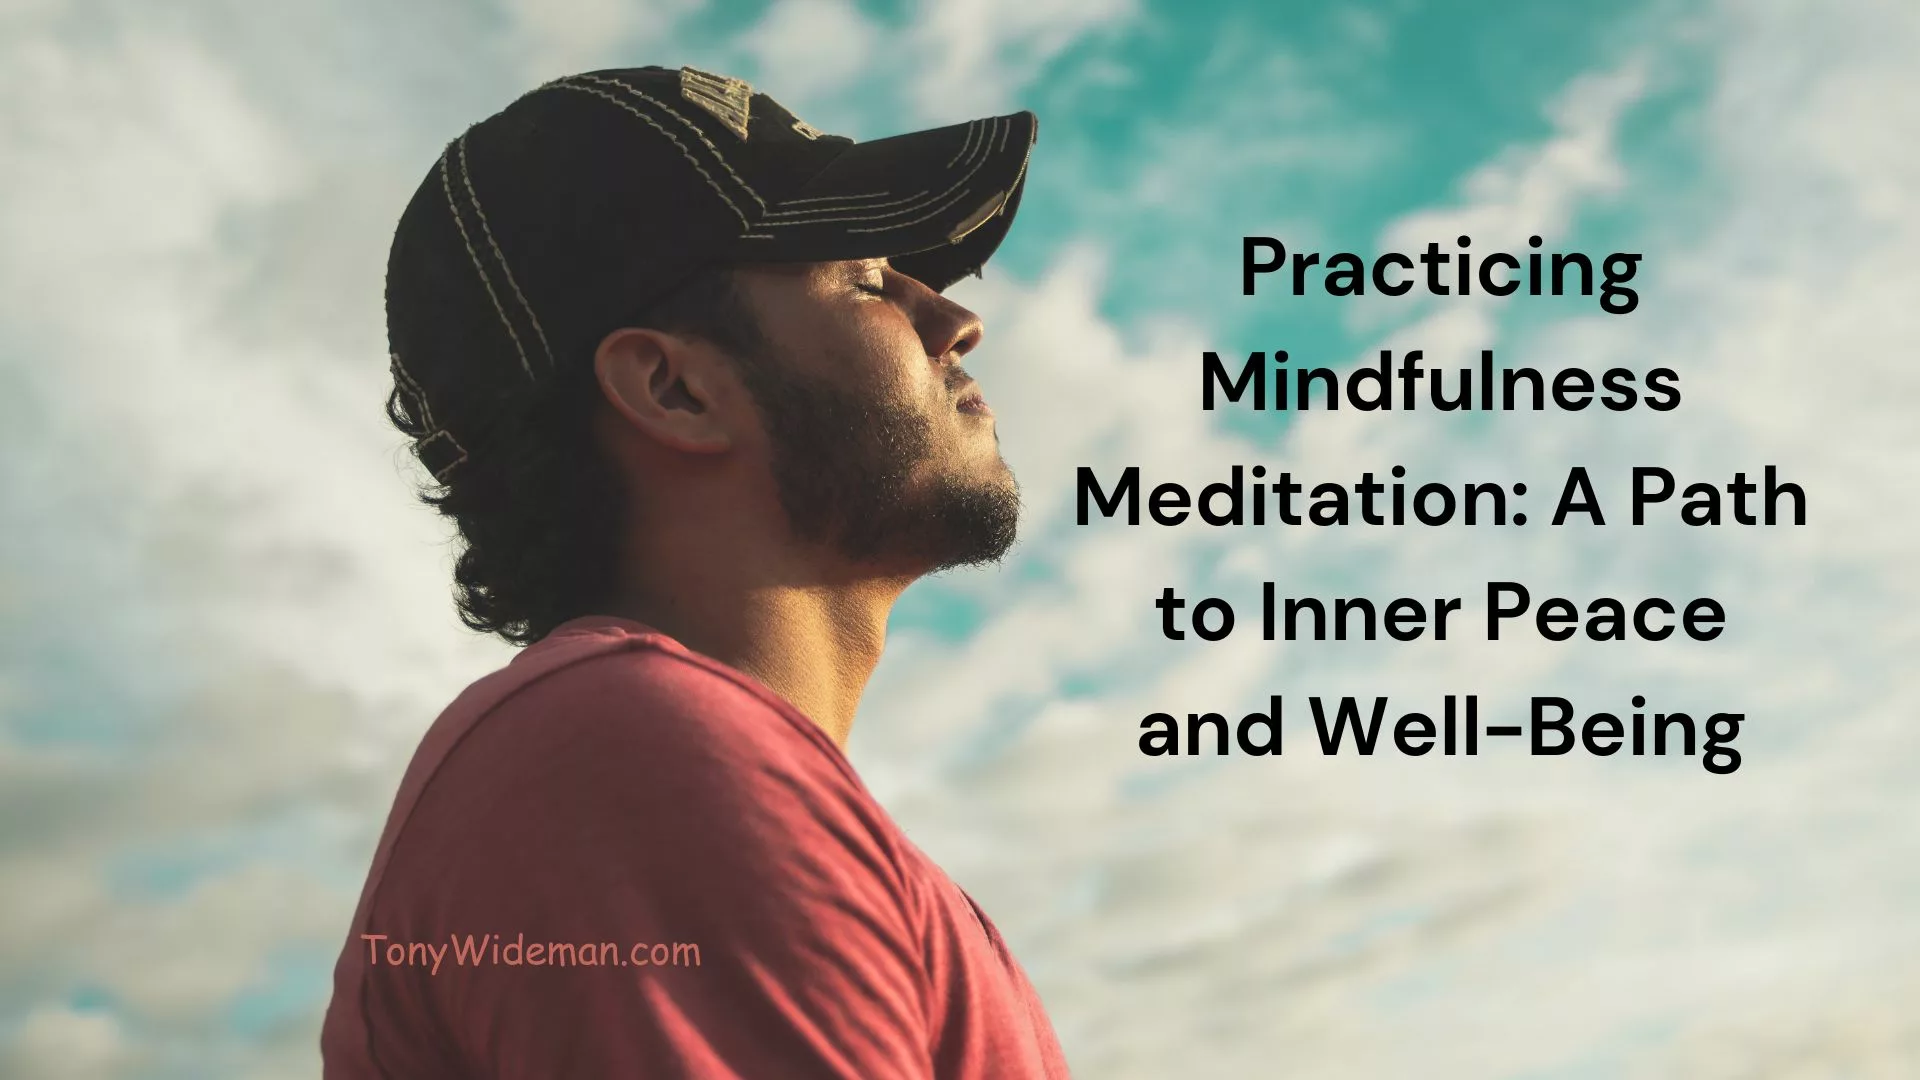 Practicing Mindfulness Meditation: Inner Peace and Well-Being